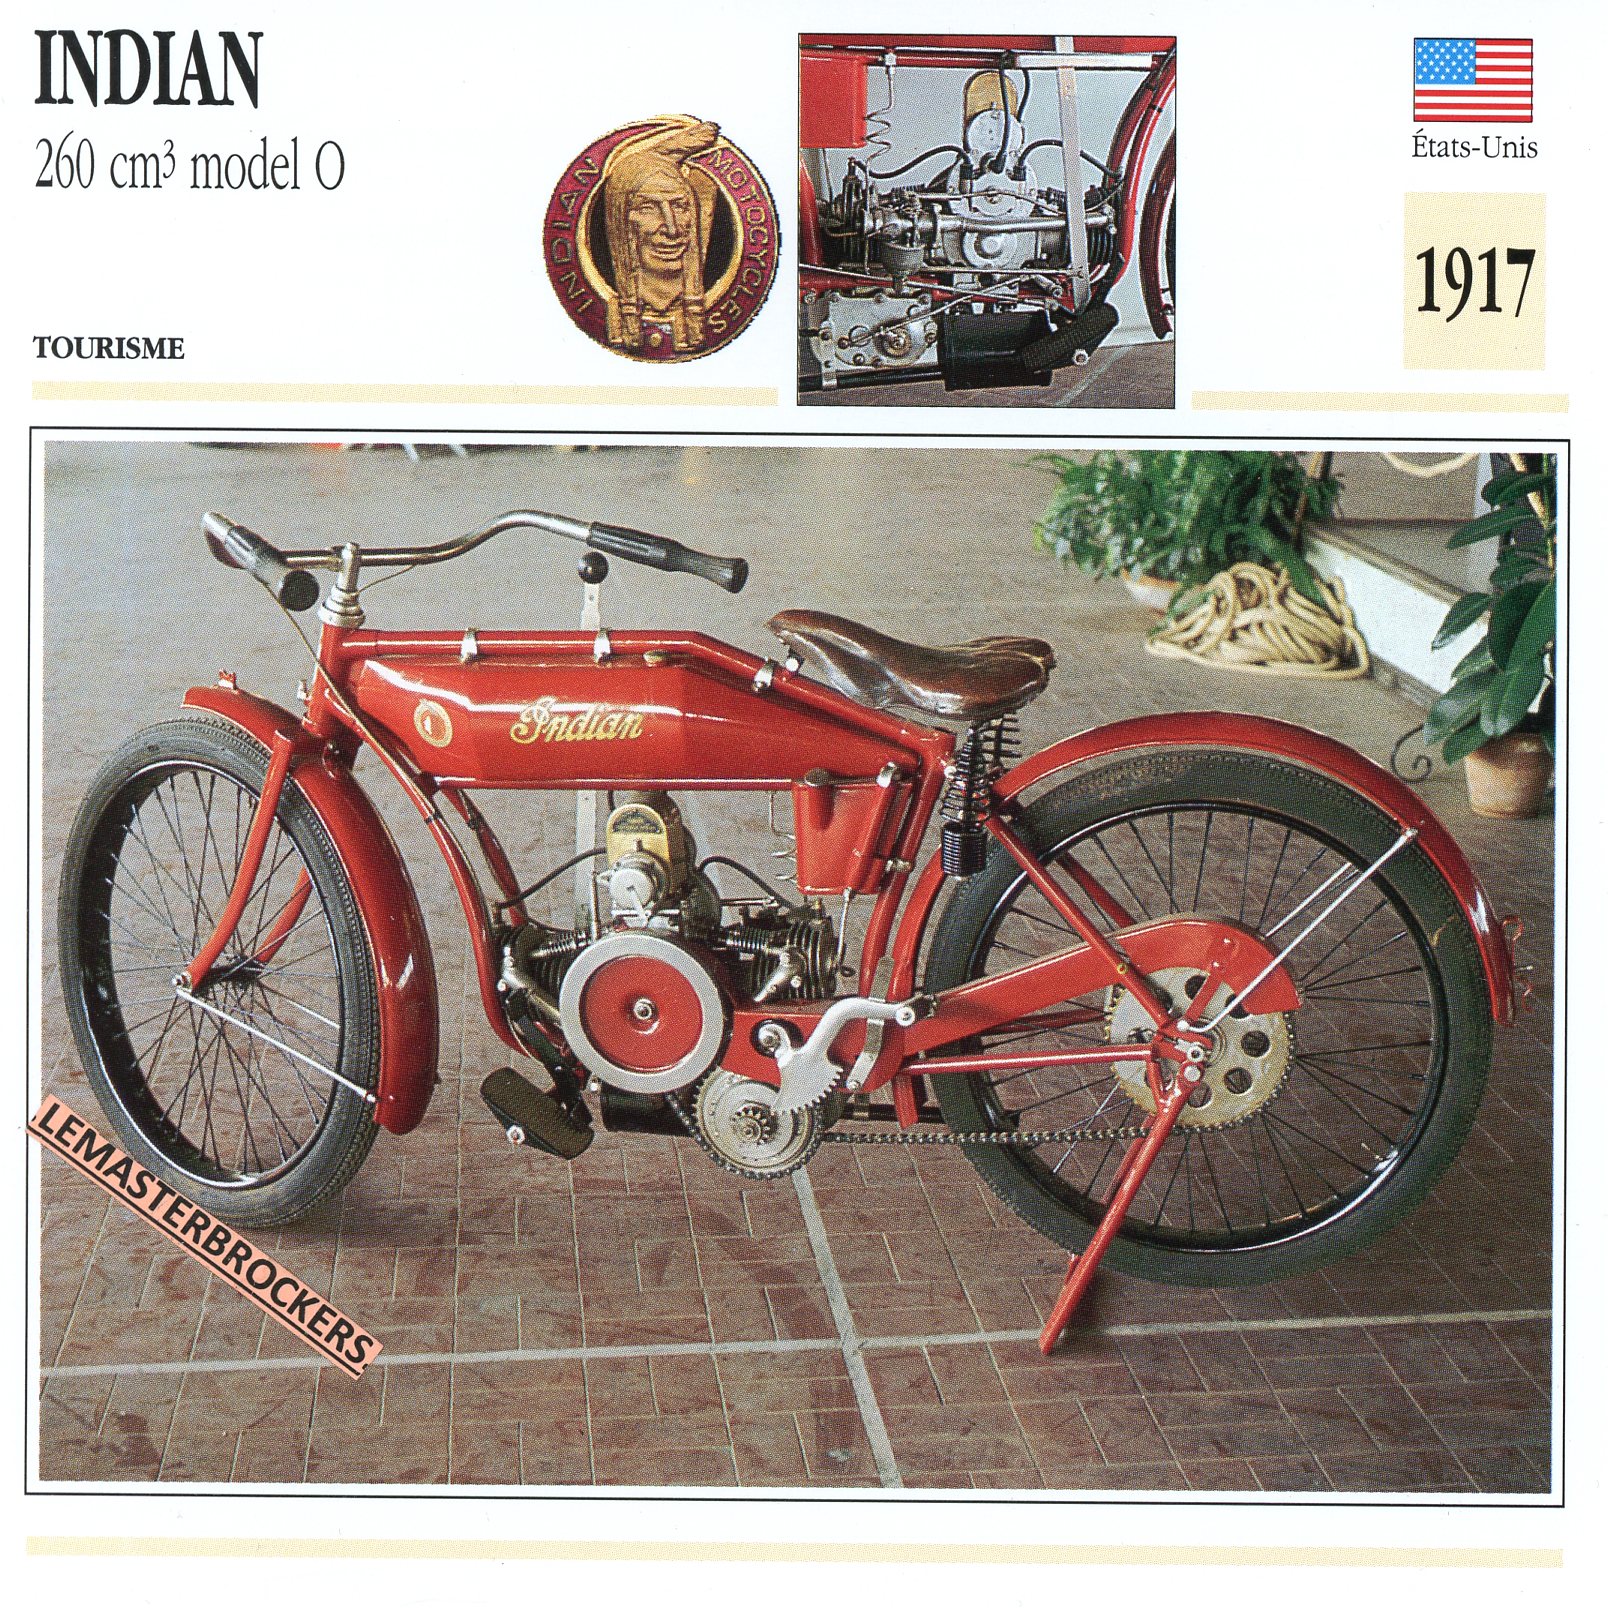 FICHE-MOTO-INDIAN-260-MODEL-0-1917-LEMASTERBROCKERS-CARD-MOTORCYCLE